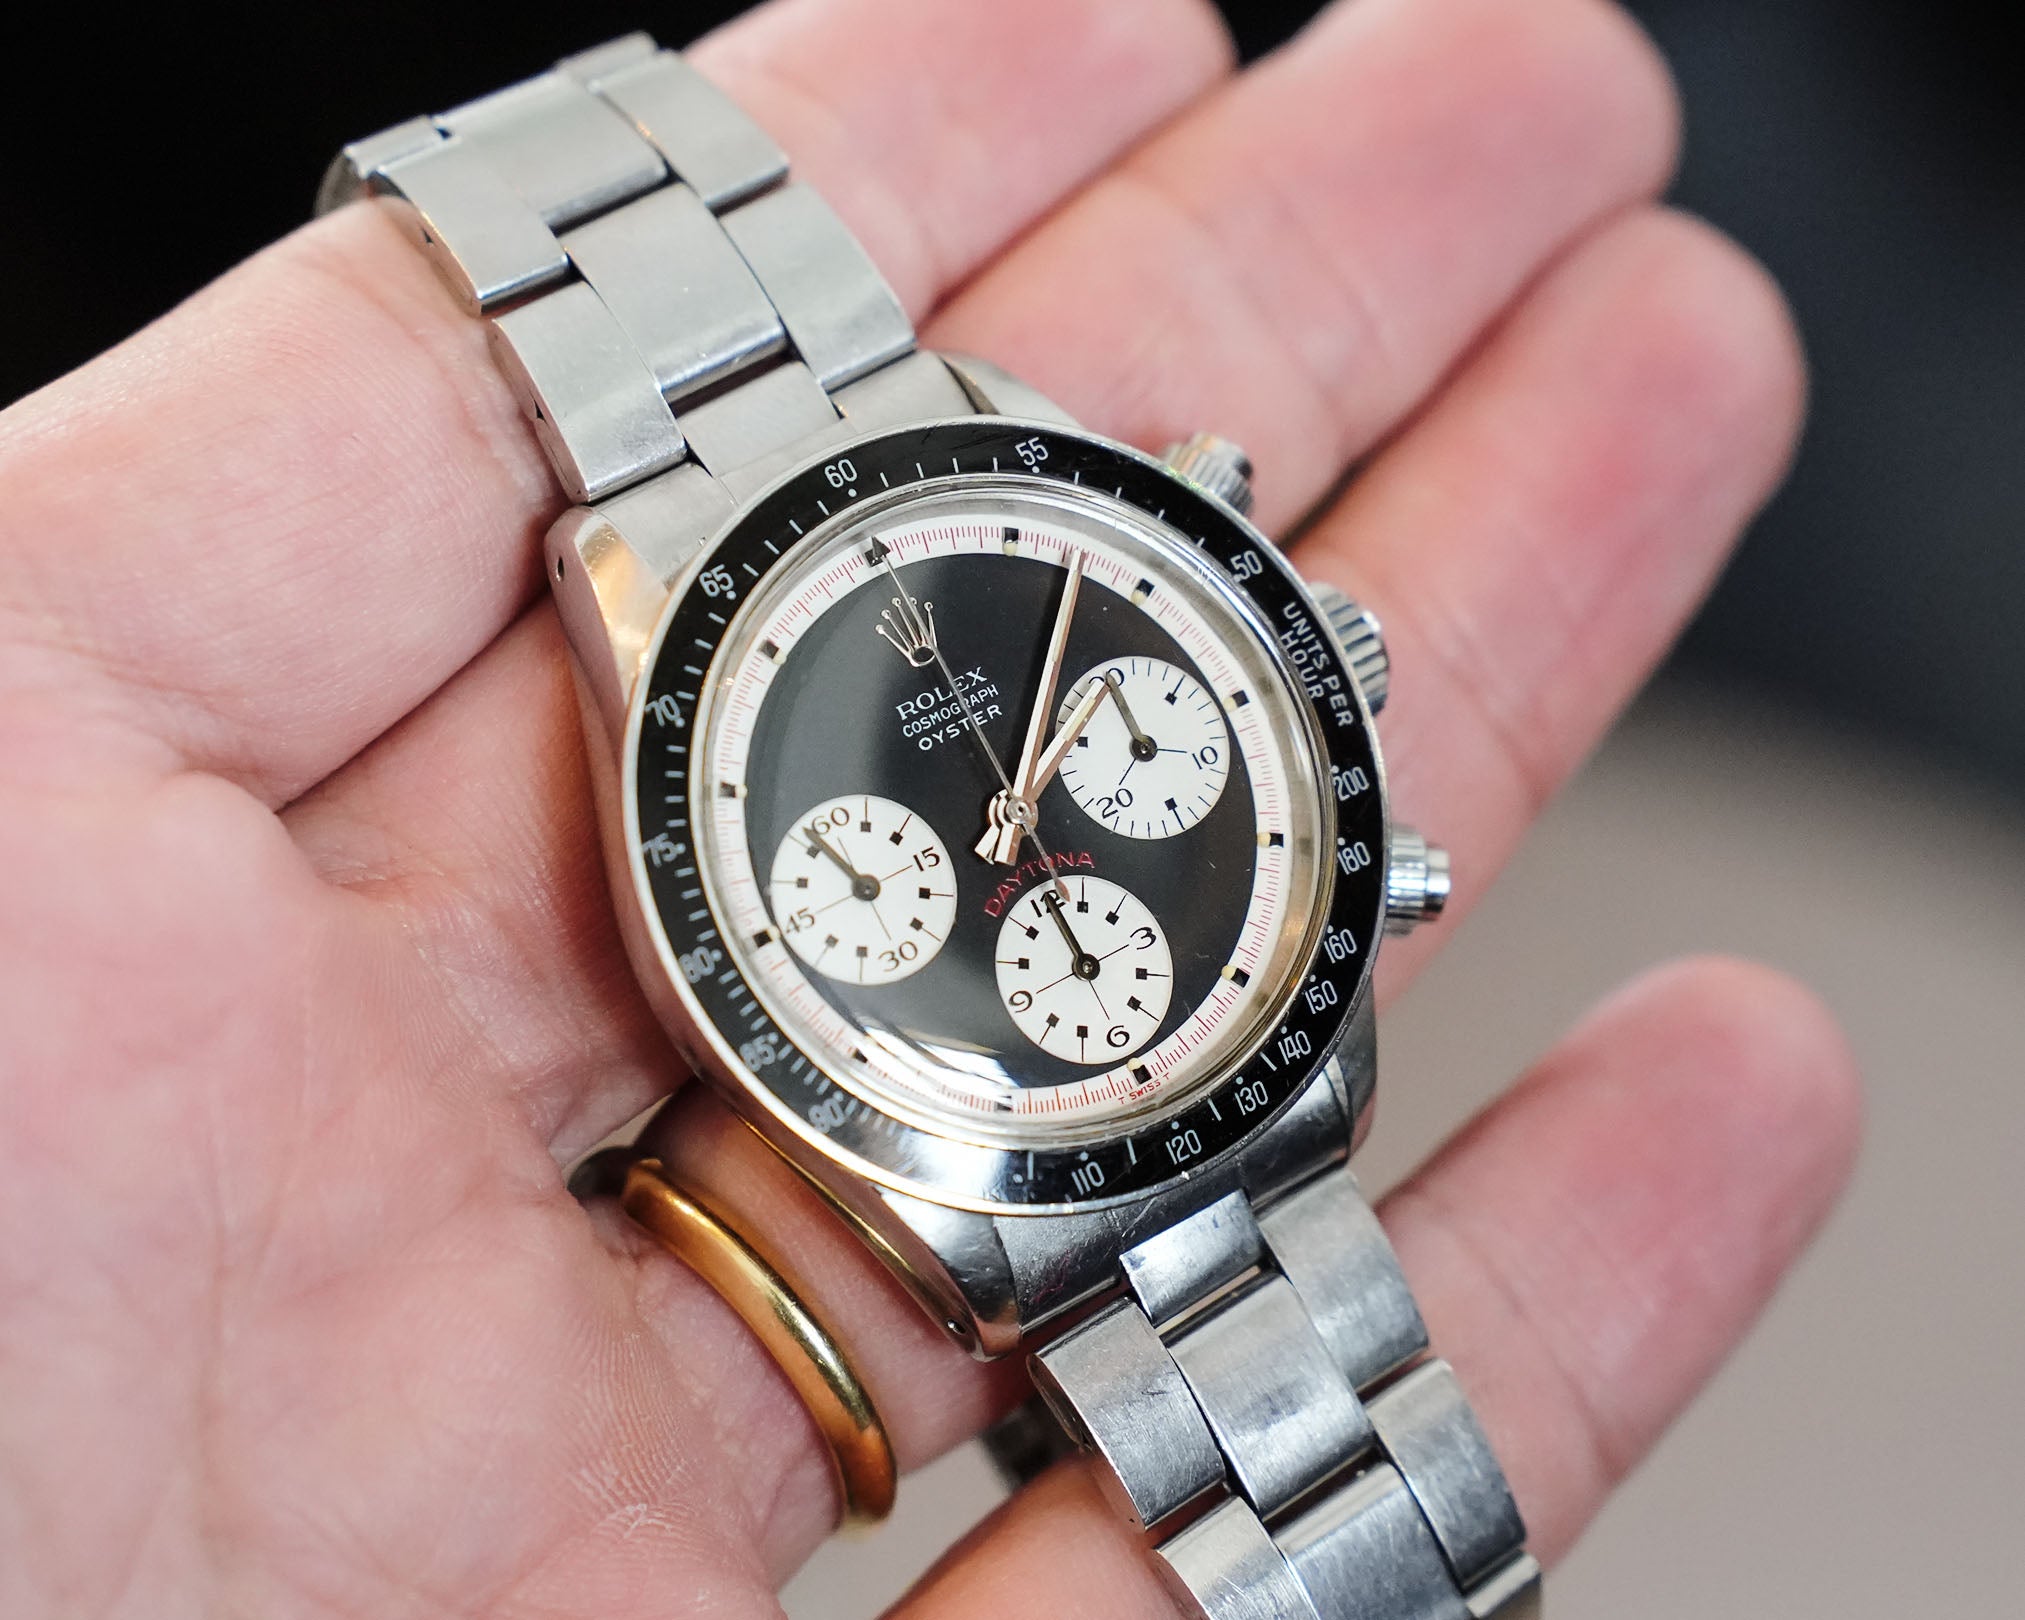 Rolex 6263 RCO Newman Black Dial Daytona at Rolliefest 2023